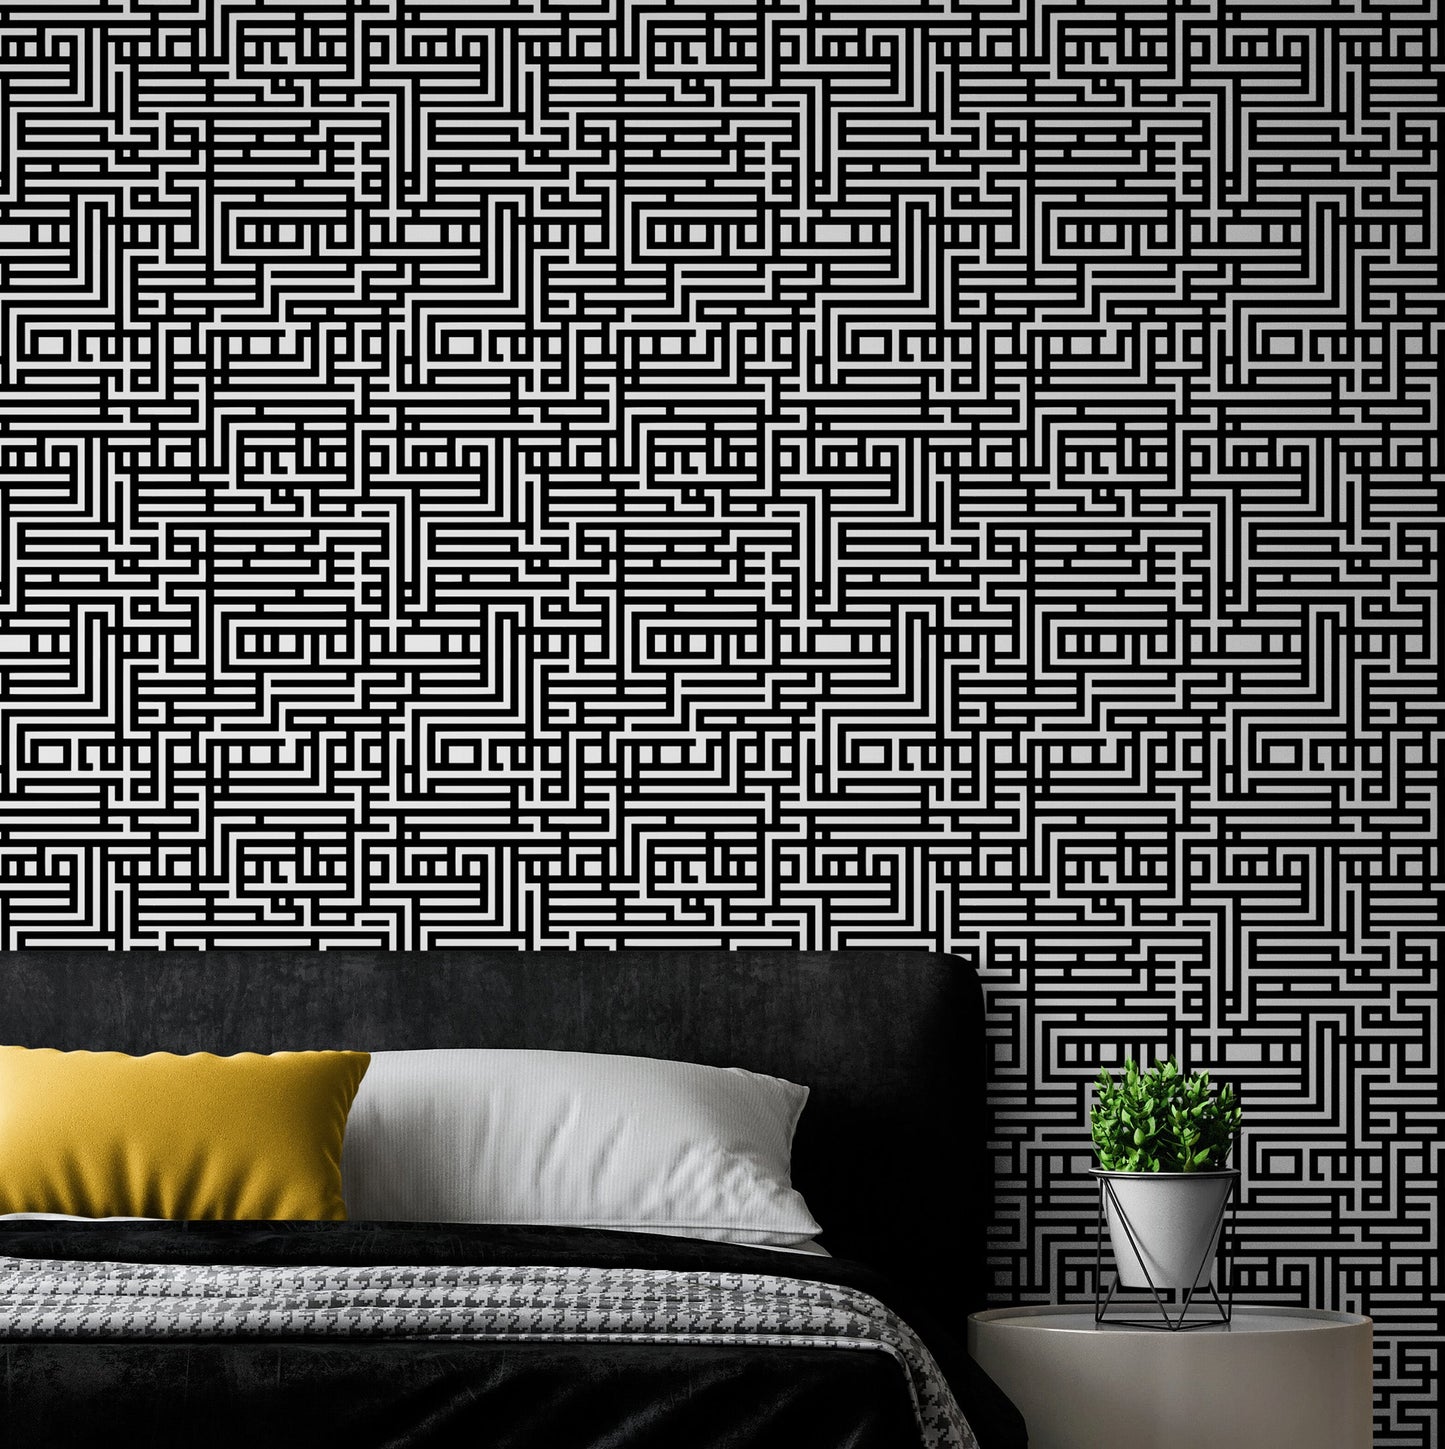 Abstract Maze Black and White Wallpaper Mural. #6739